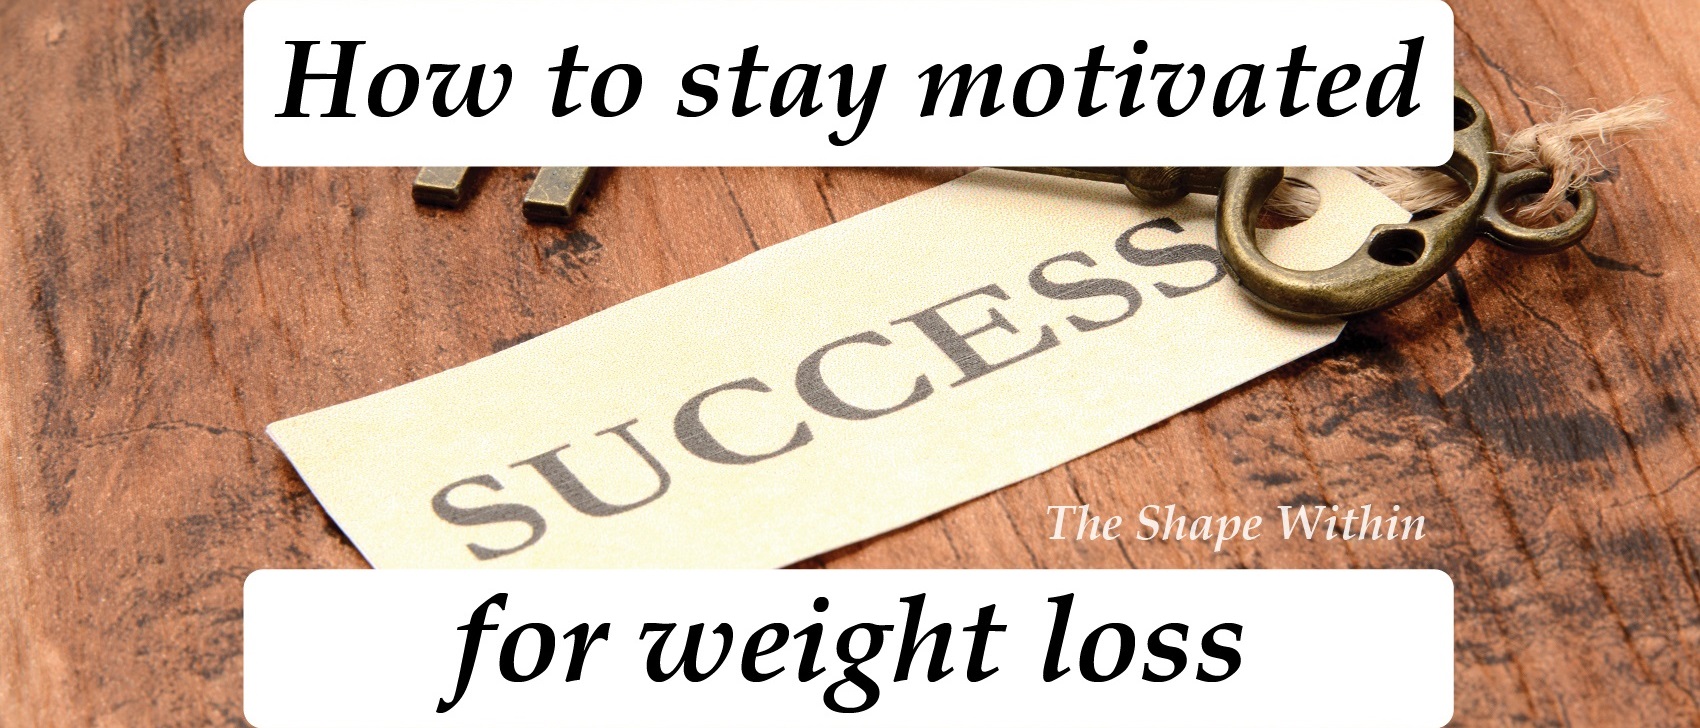 Finding motivation to lose weight is just as important as diet and exercise in reaching your goals.